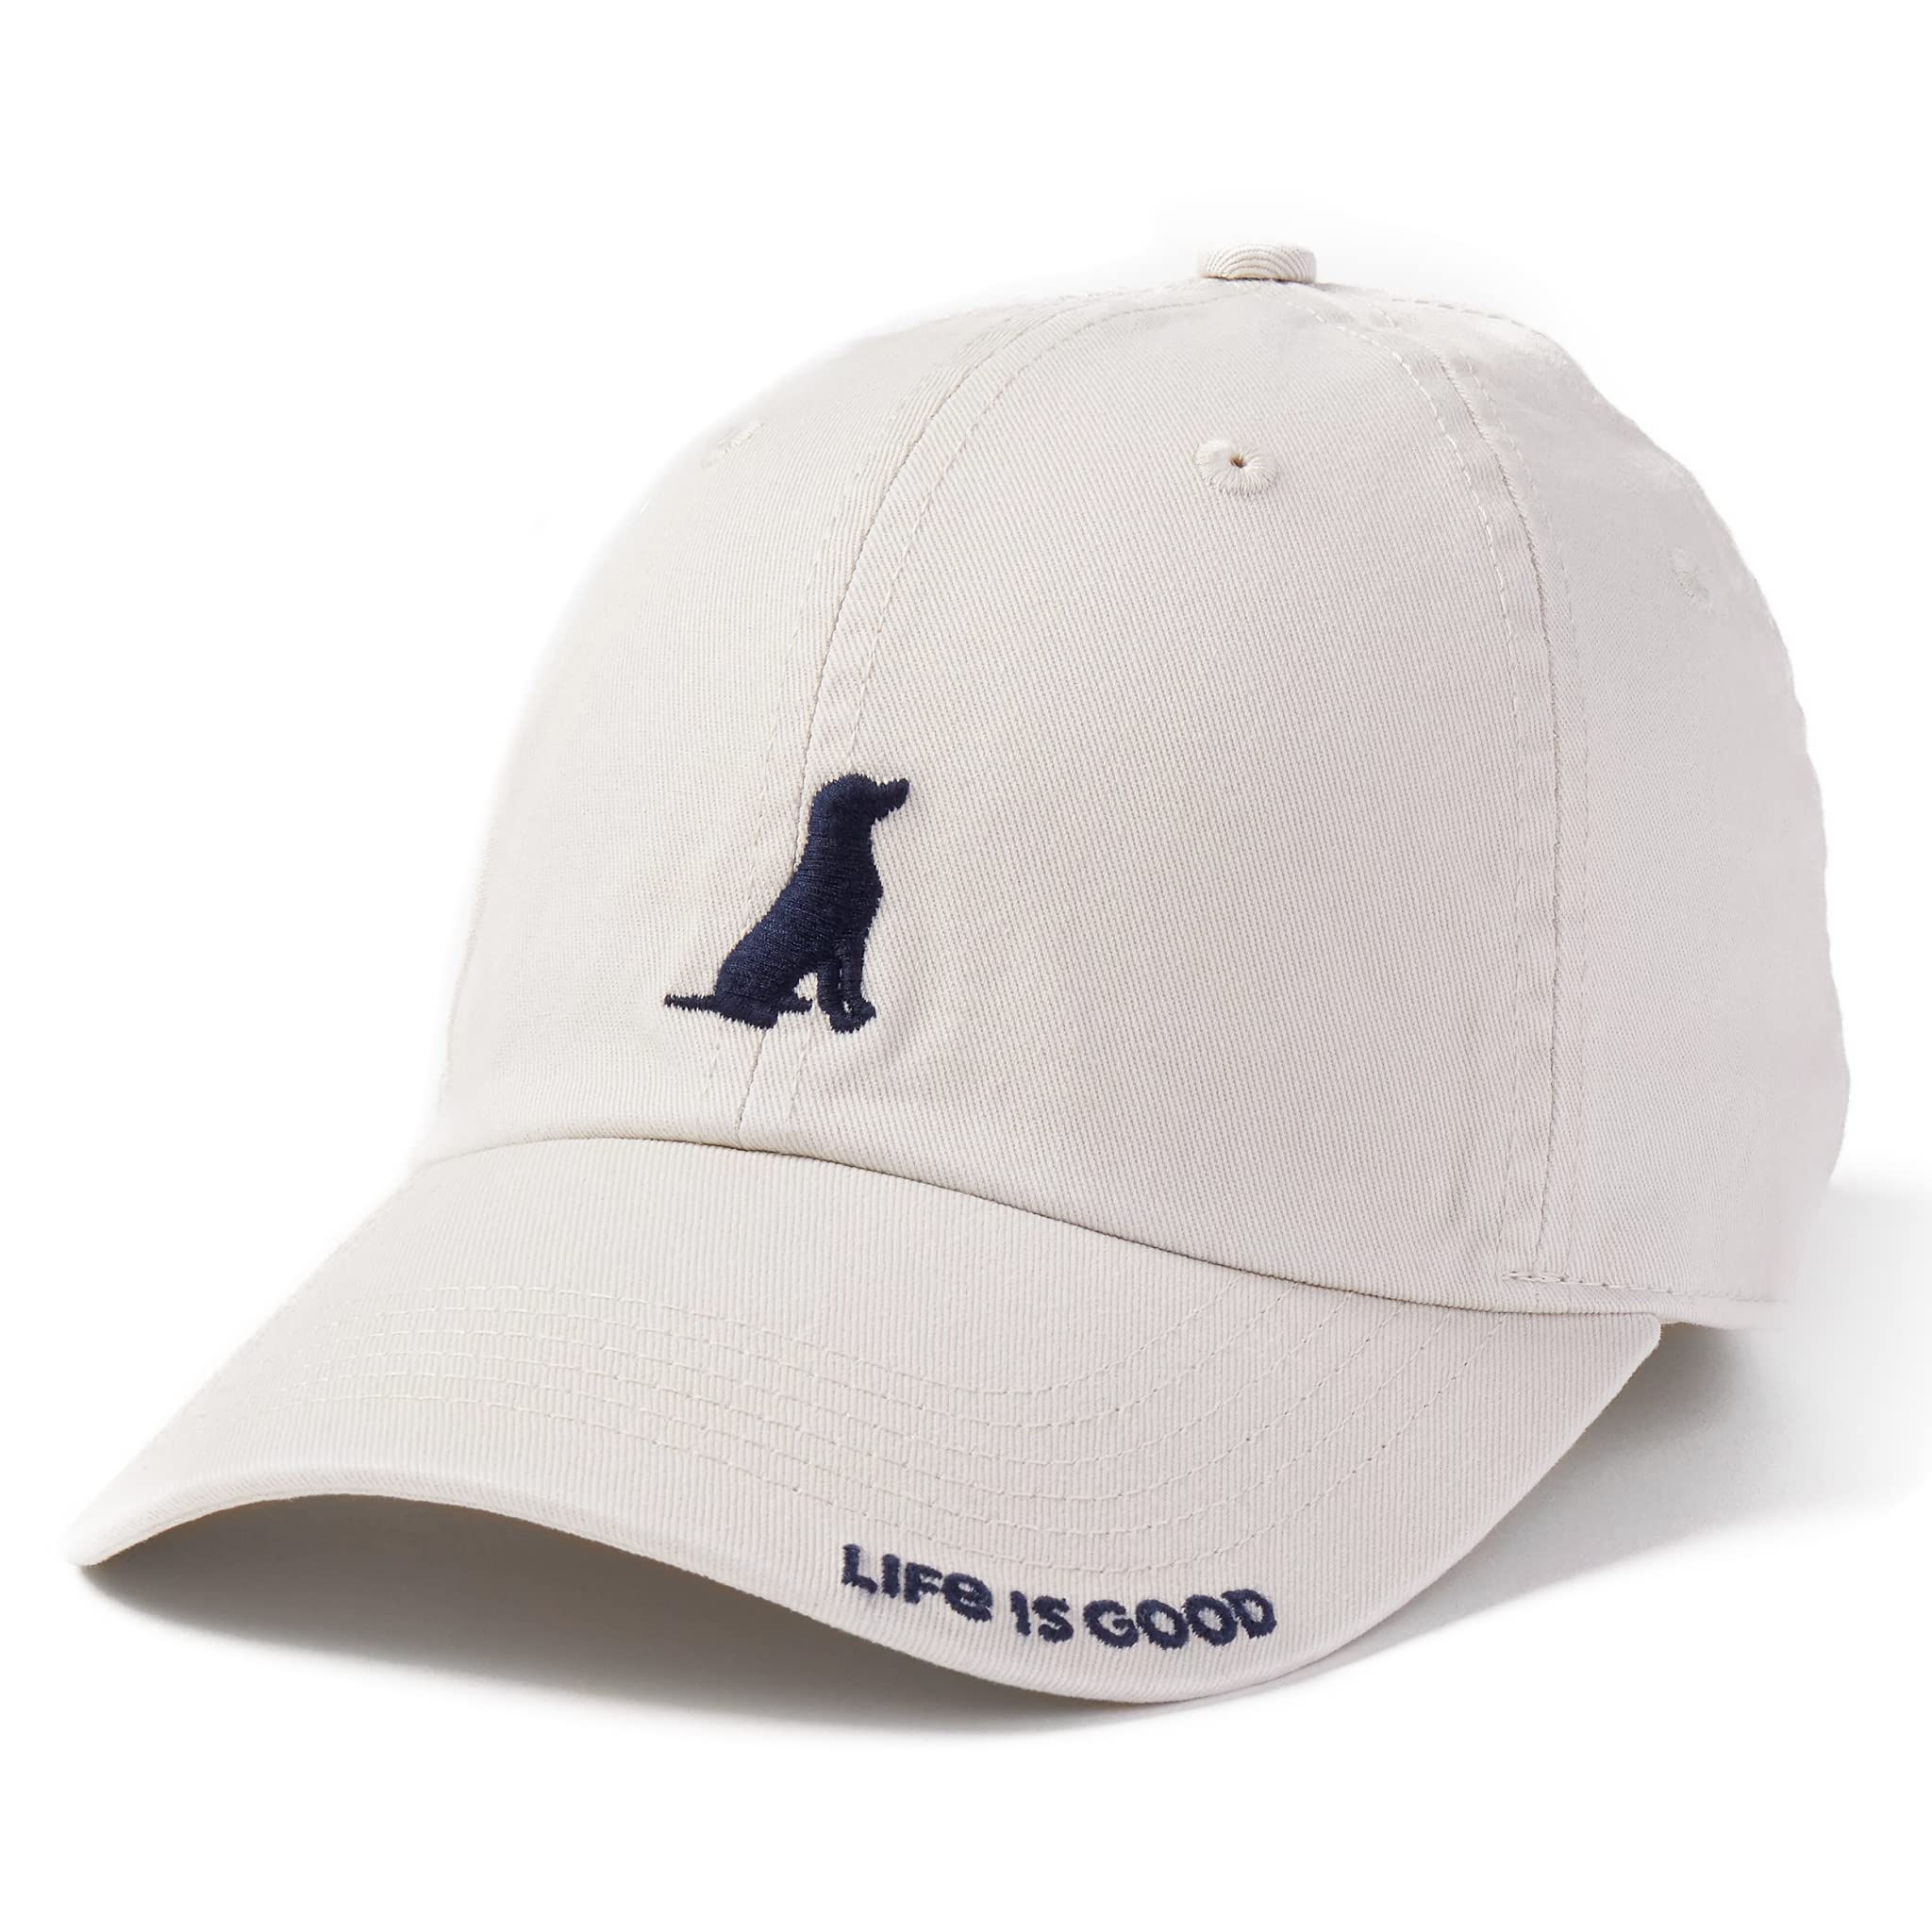 Life is Good Adult Chill Cap Baseball Hat for Men and Women, One Size